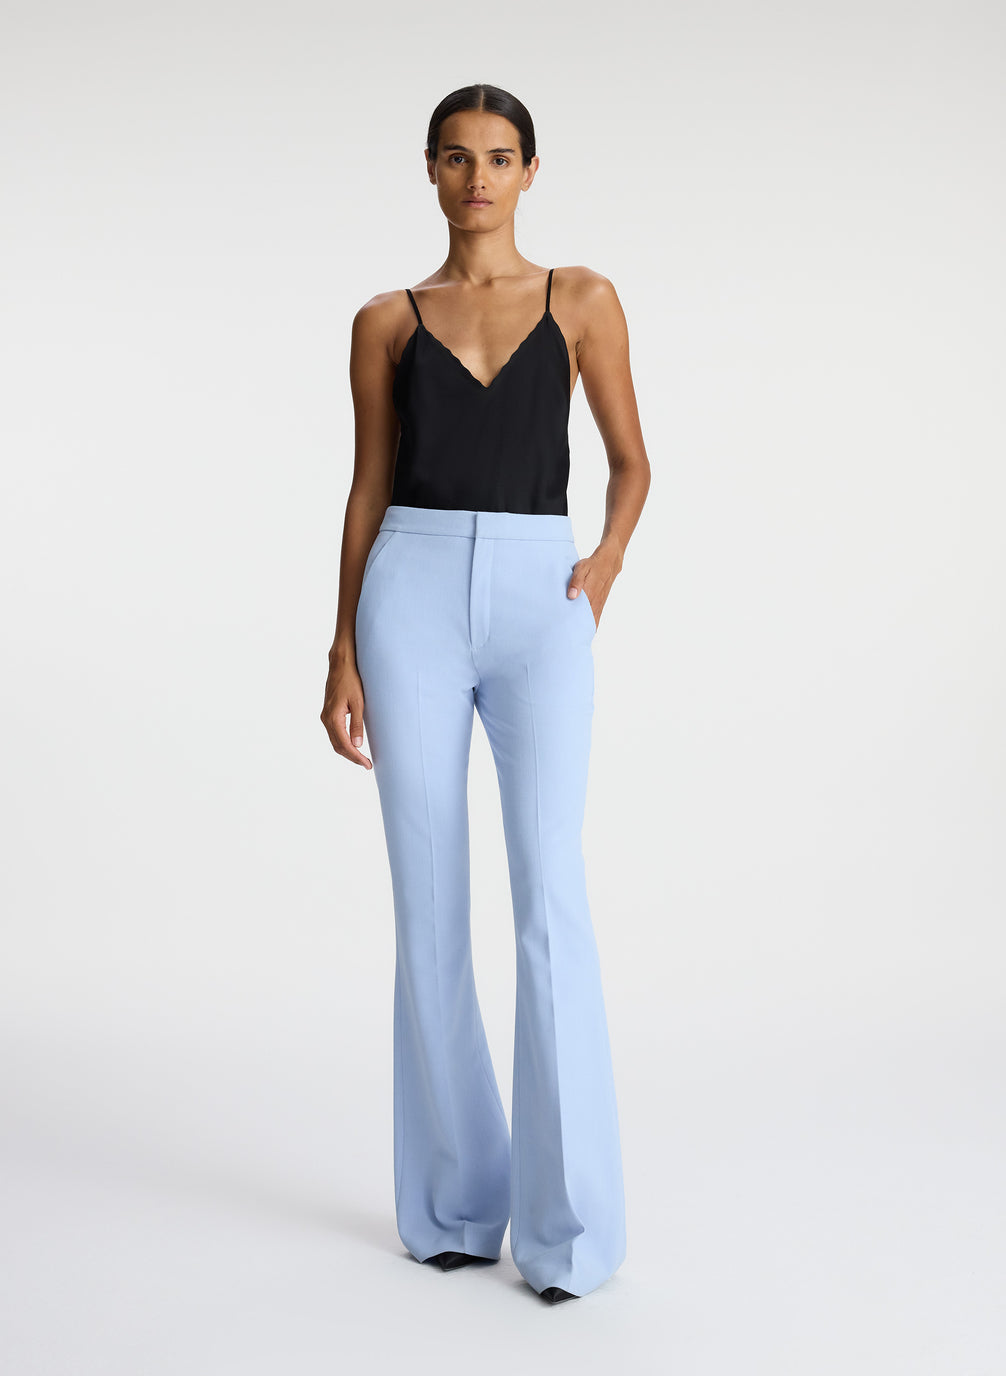 front view of woman wearing black satin camisole with light blue pants